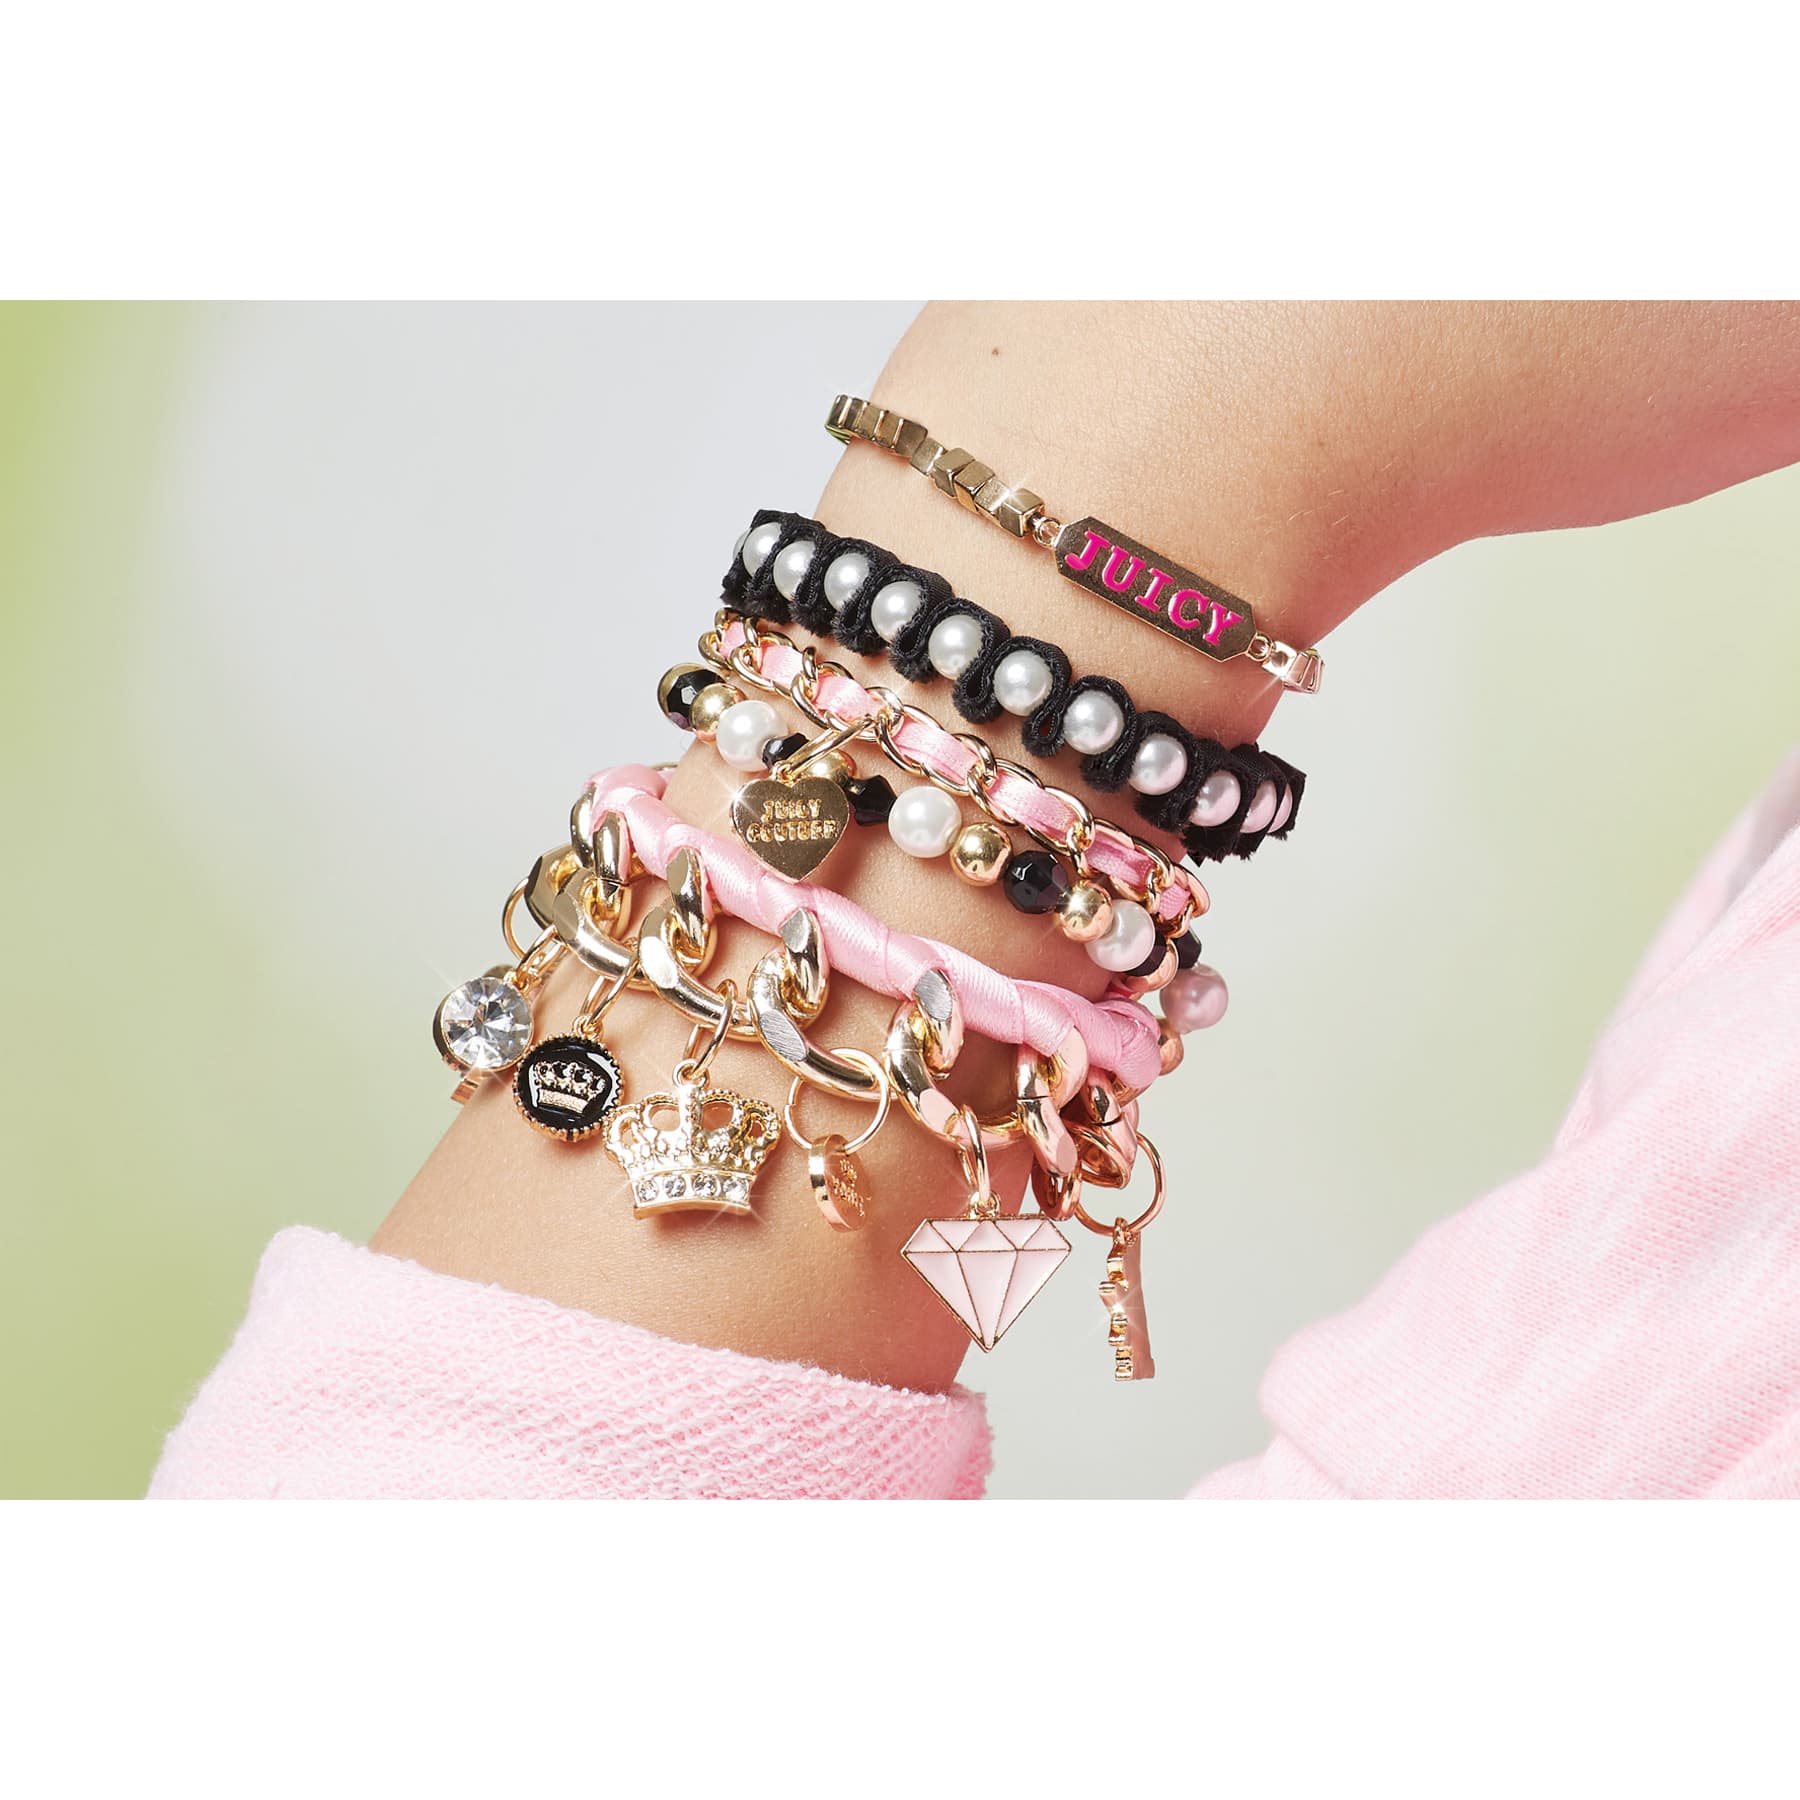 Juicy Couture Absolutely Charming Bracelets by Make it Real